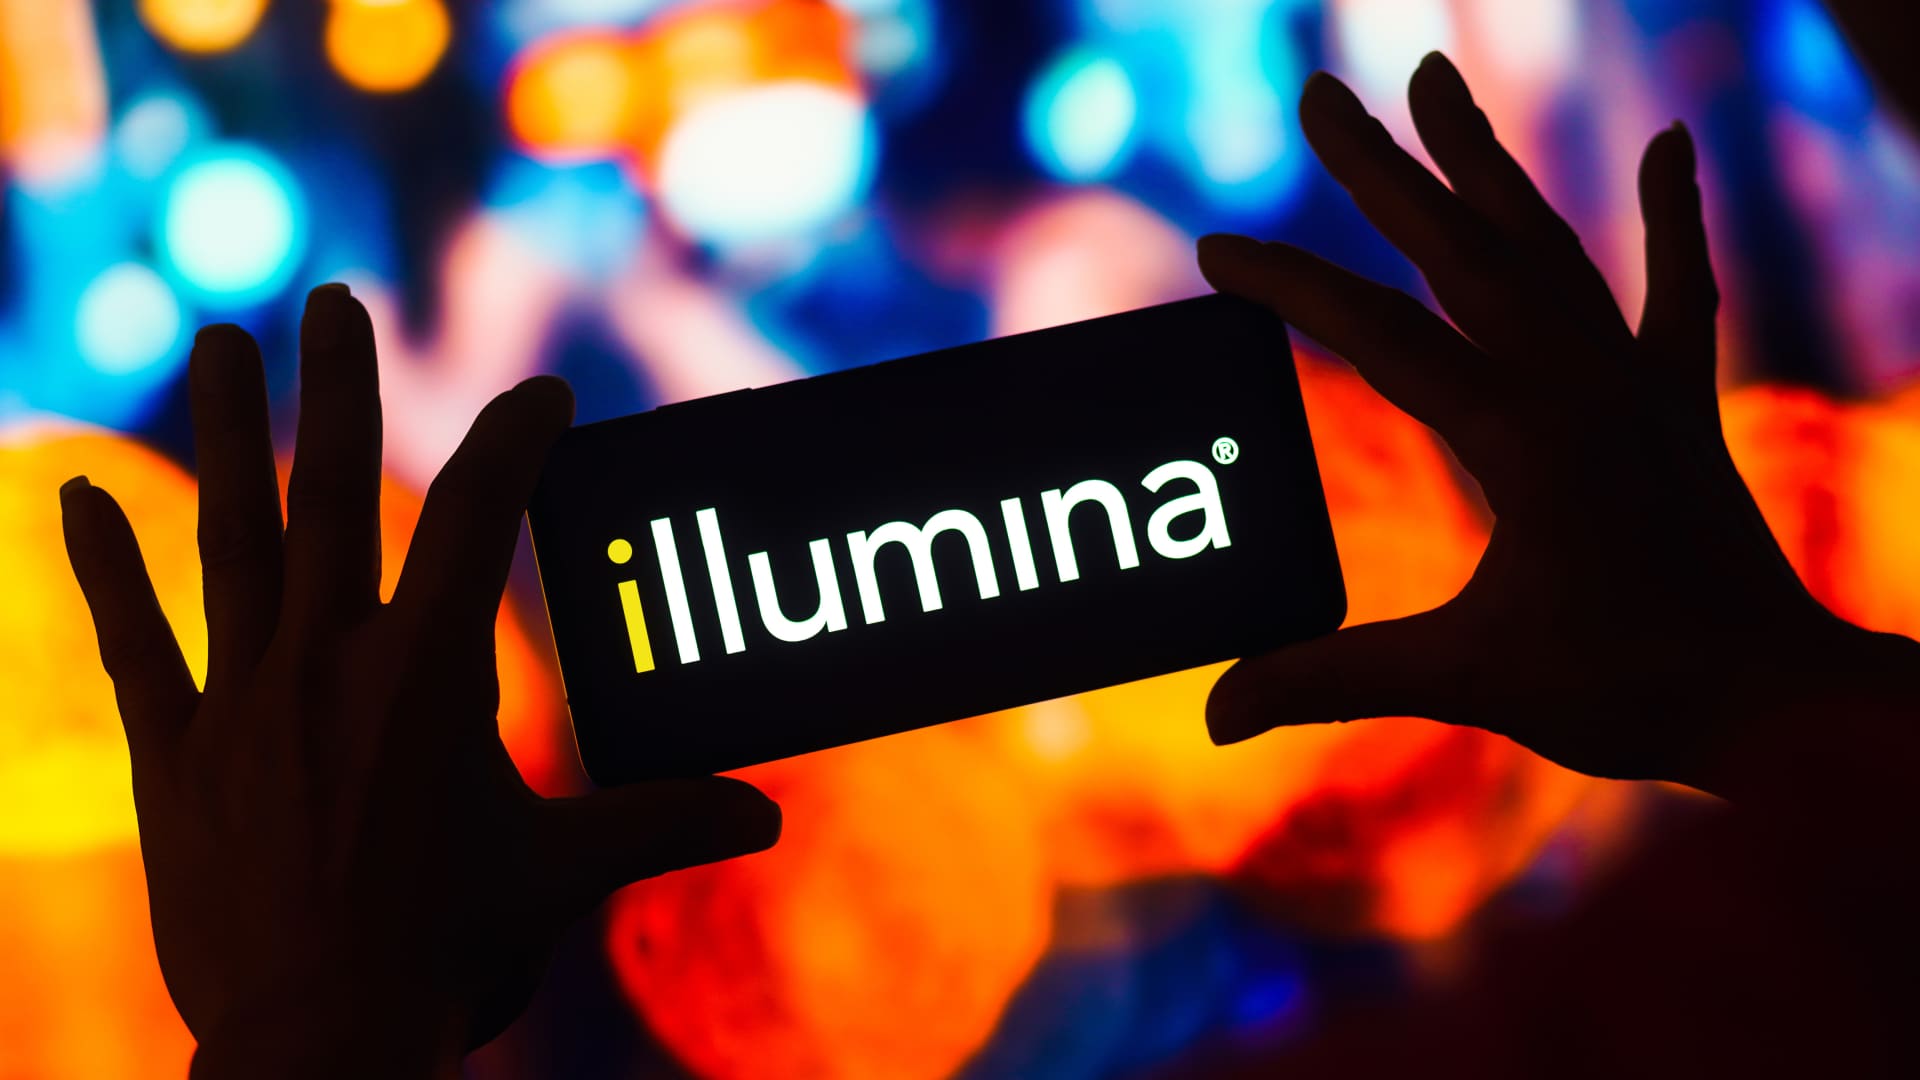 Illumina-Grail deal wins support from Republican lawmakers, state AGs